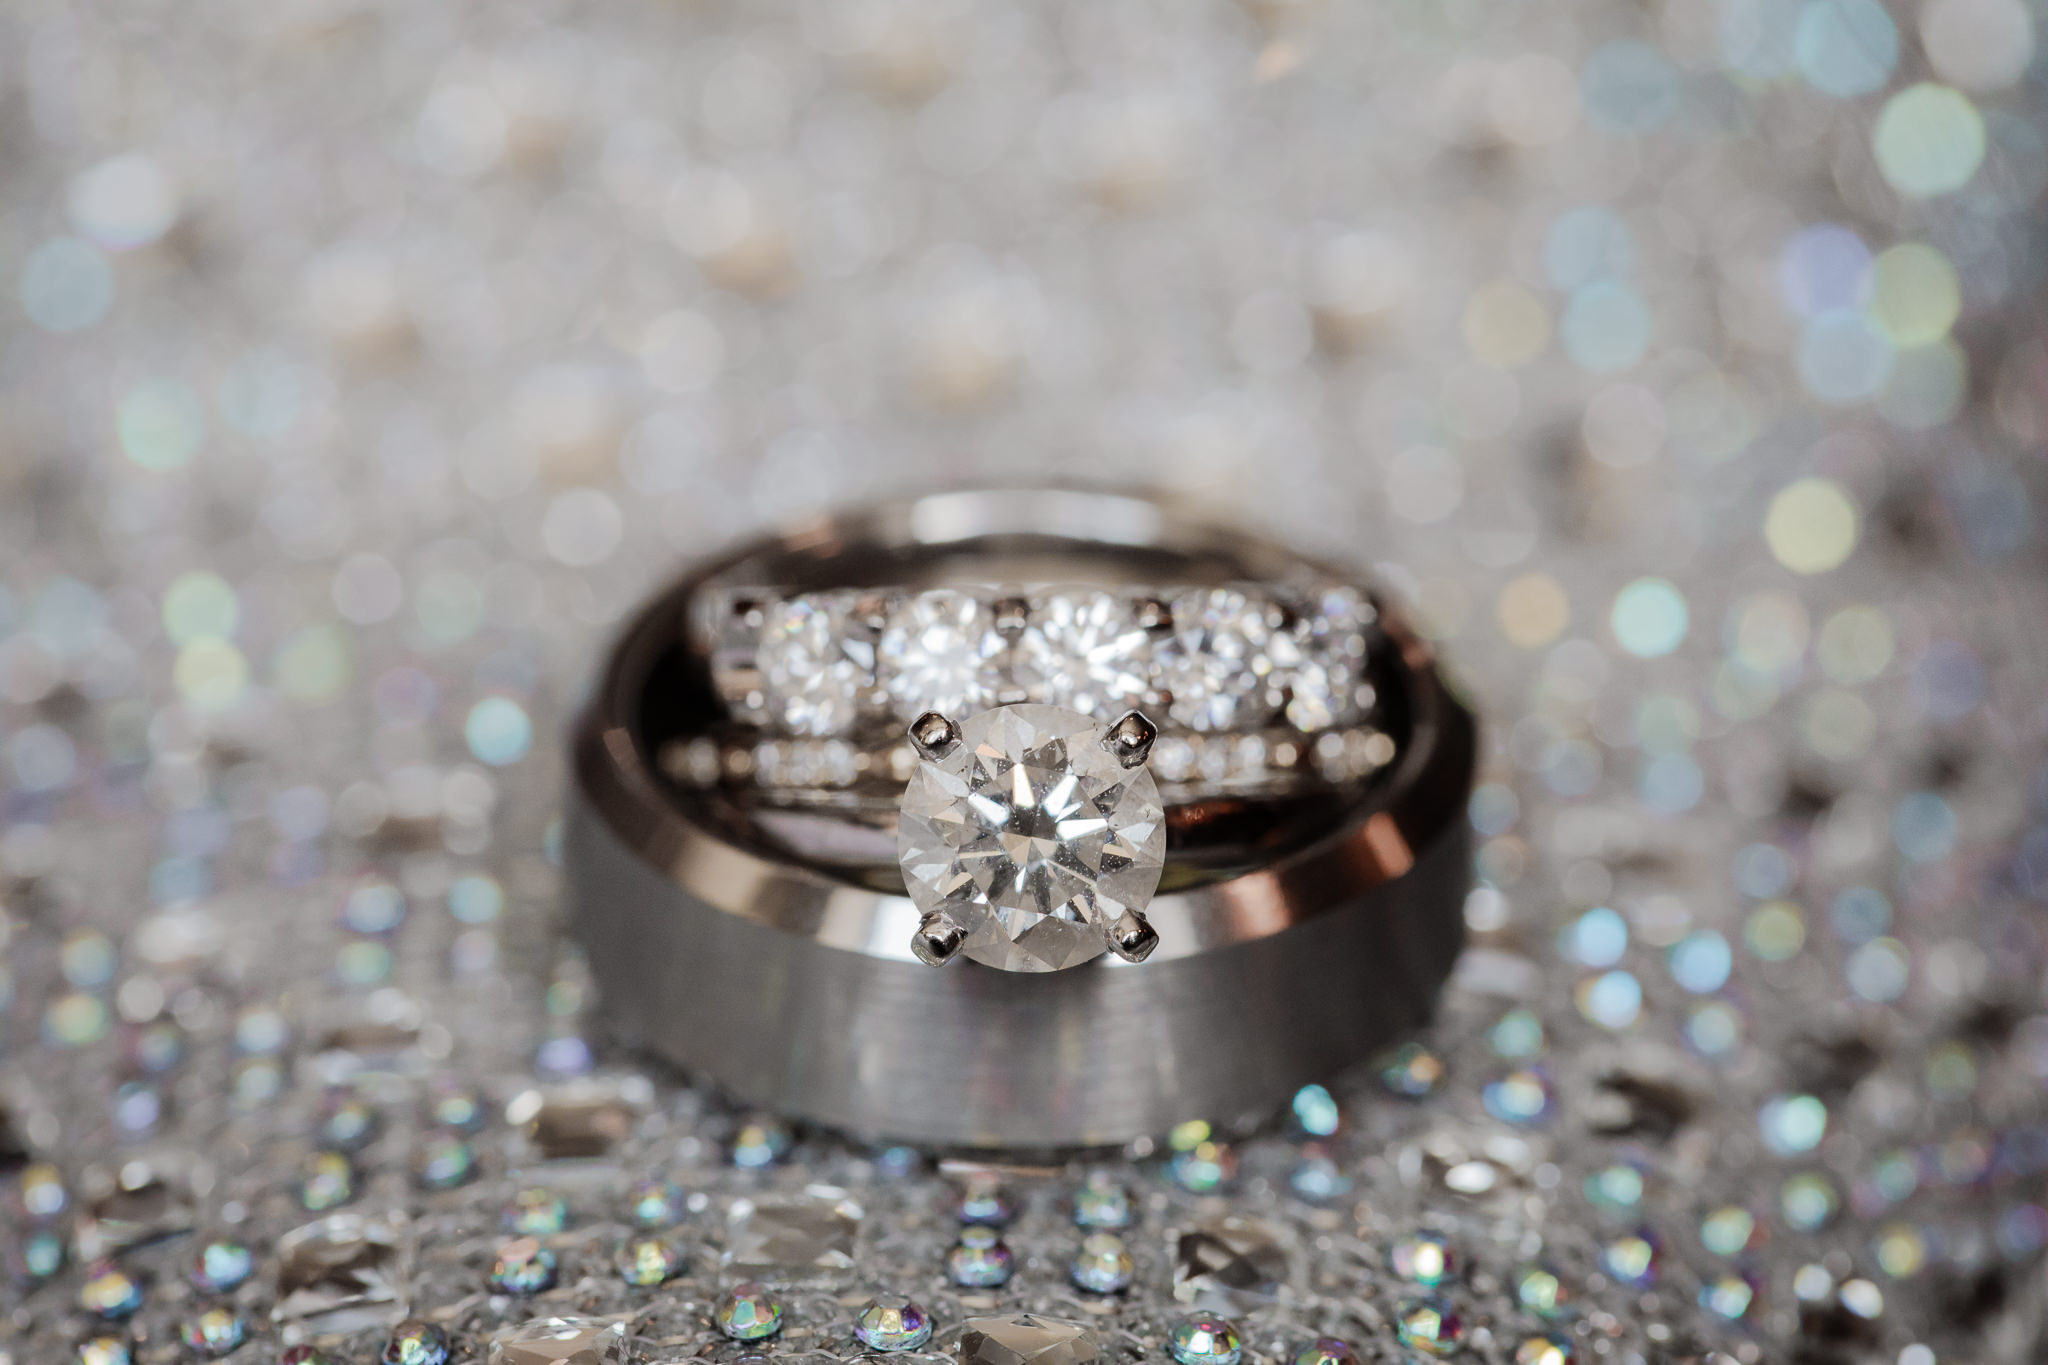 Diamond engagement ring and wedding bands from Goldstock Jewelers in Pittsburgh, PA